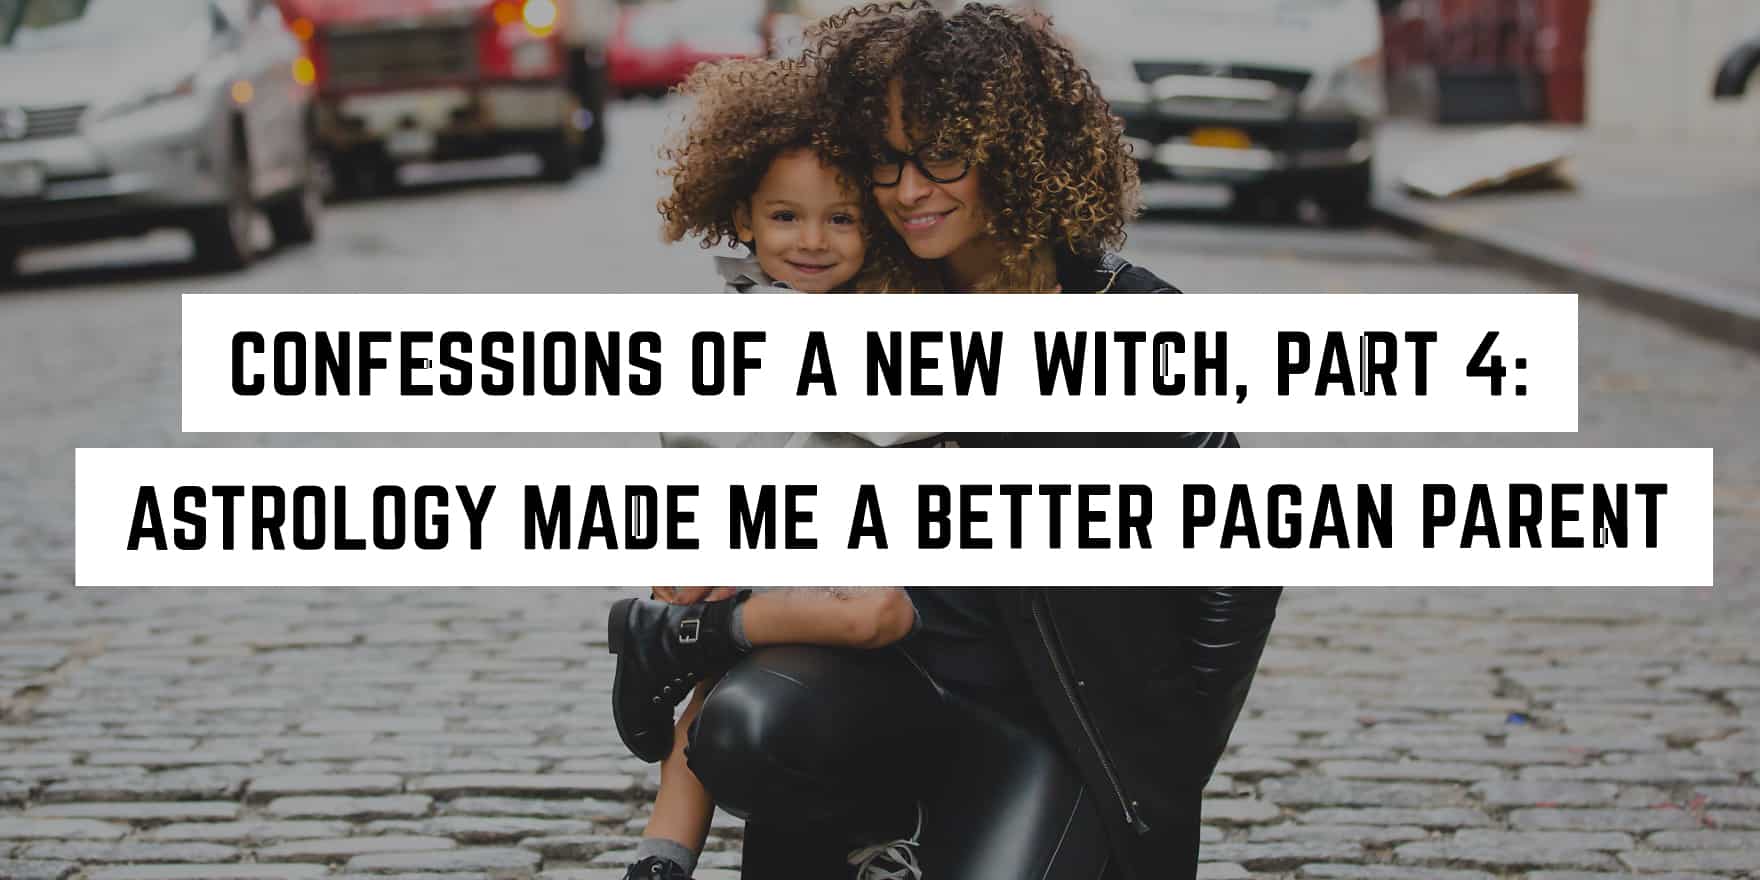 Confessions of a New Witch, Part 4: My Astrologer Made Me A Better Pagan Parent